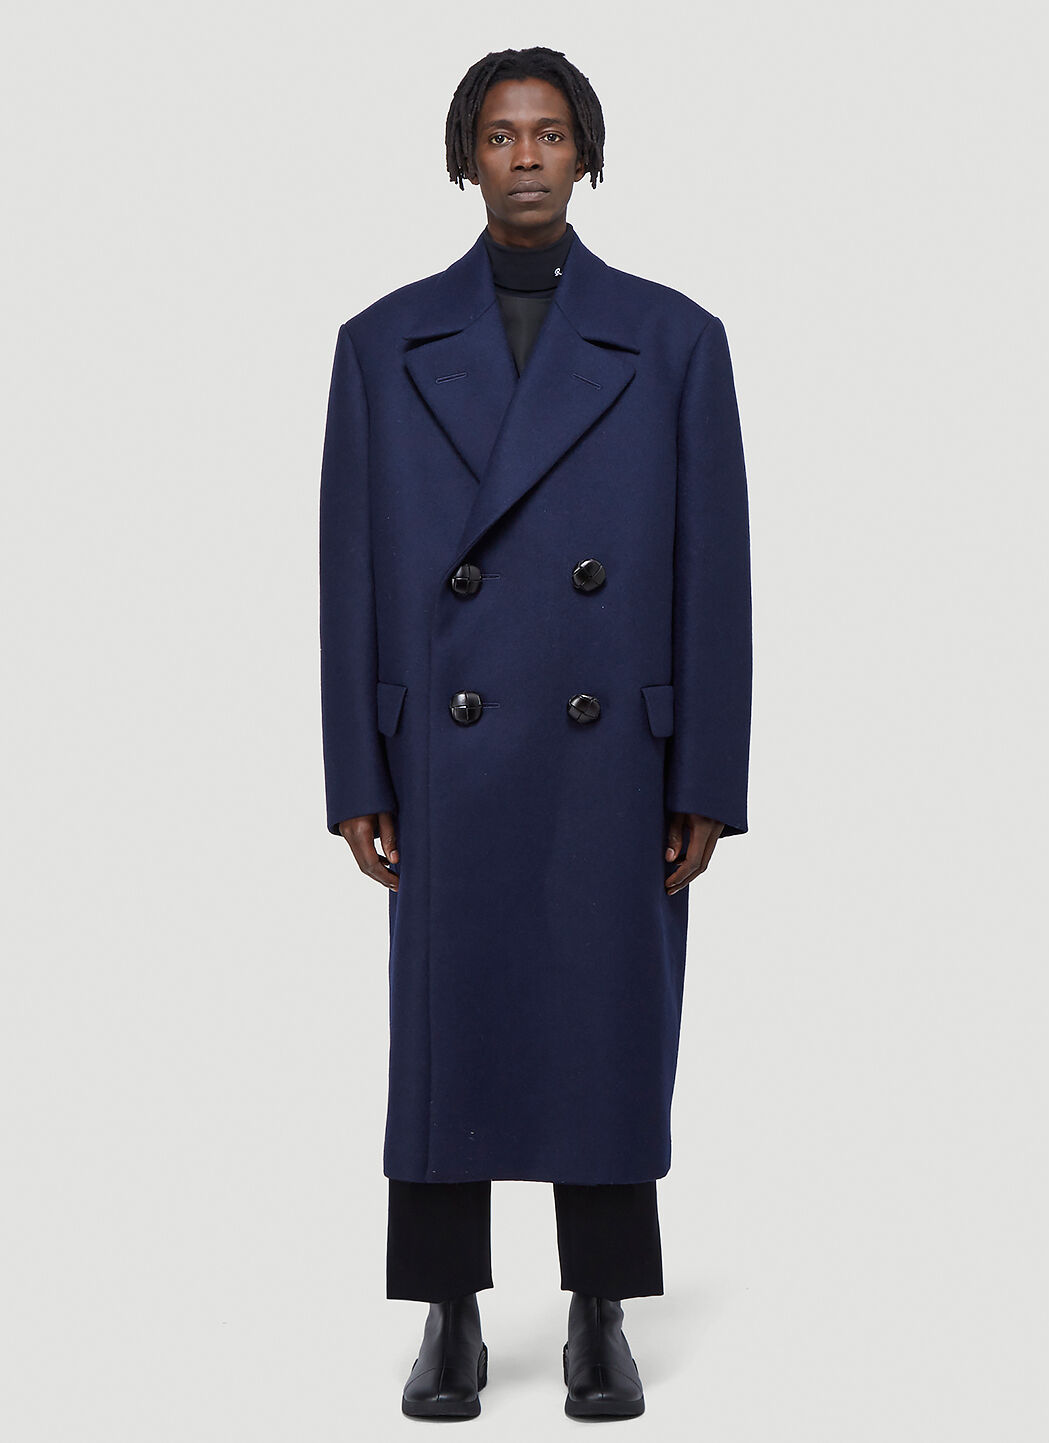 Raf Simons x Fred Perry Oversized Double-Breasted Coat ブラック rsf0152002